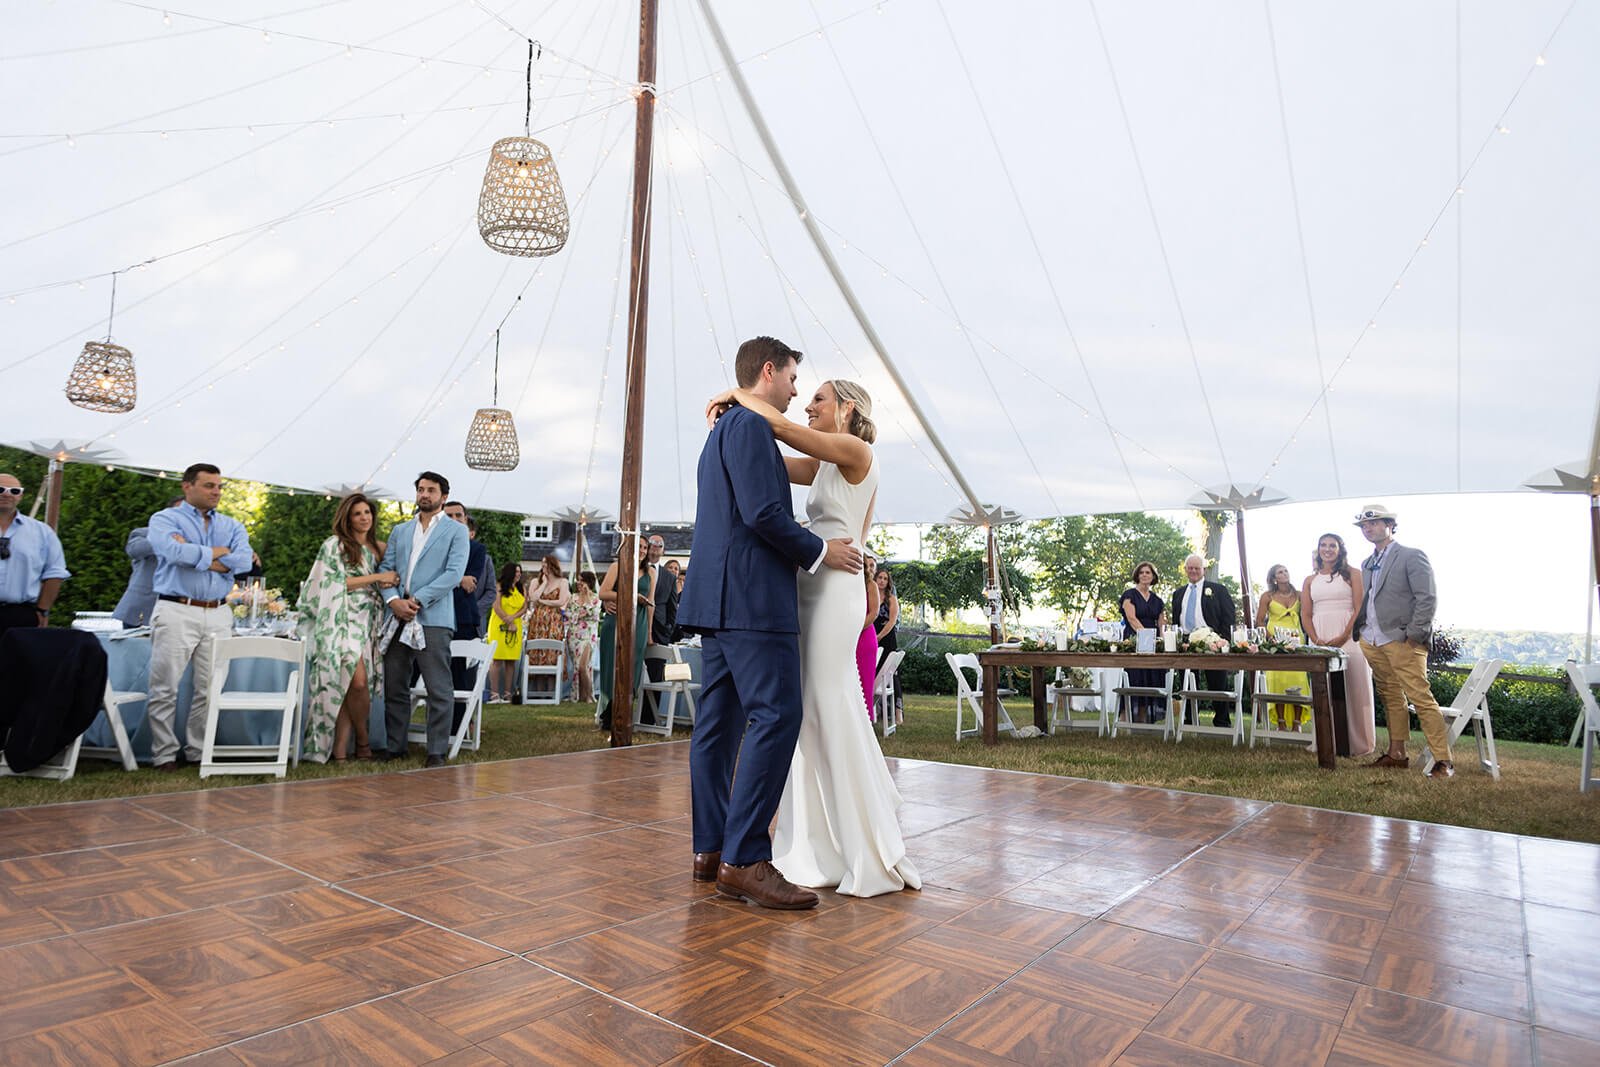 Bride and groom first dance at their tented reception in New York